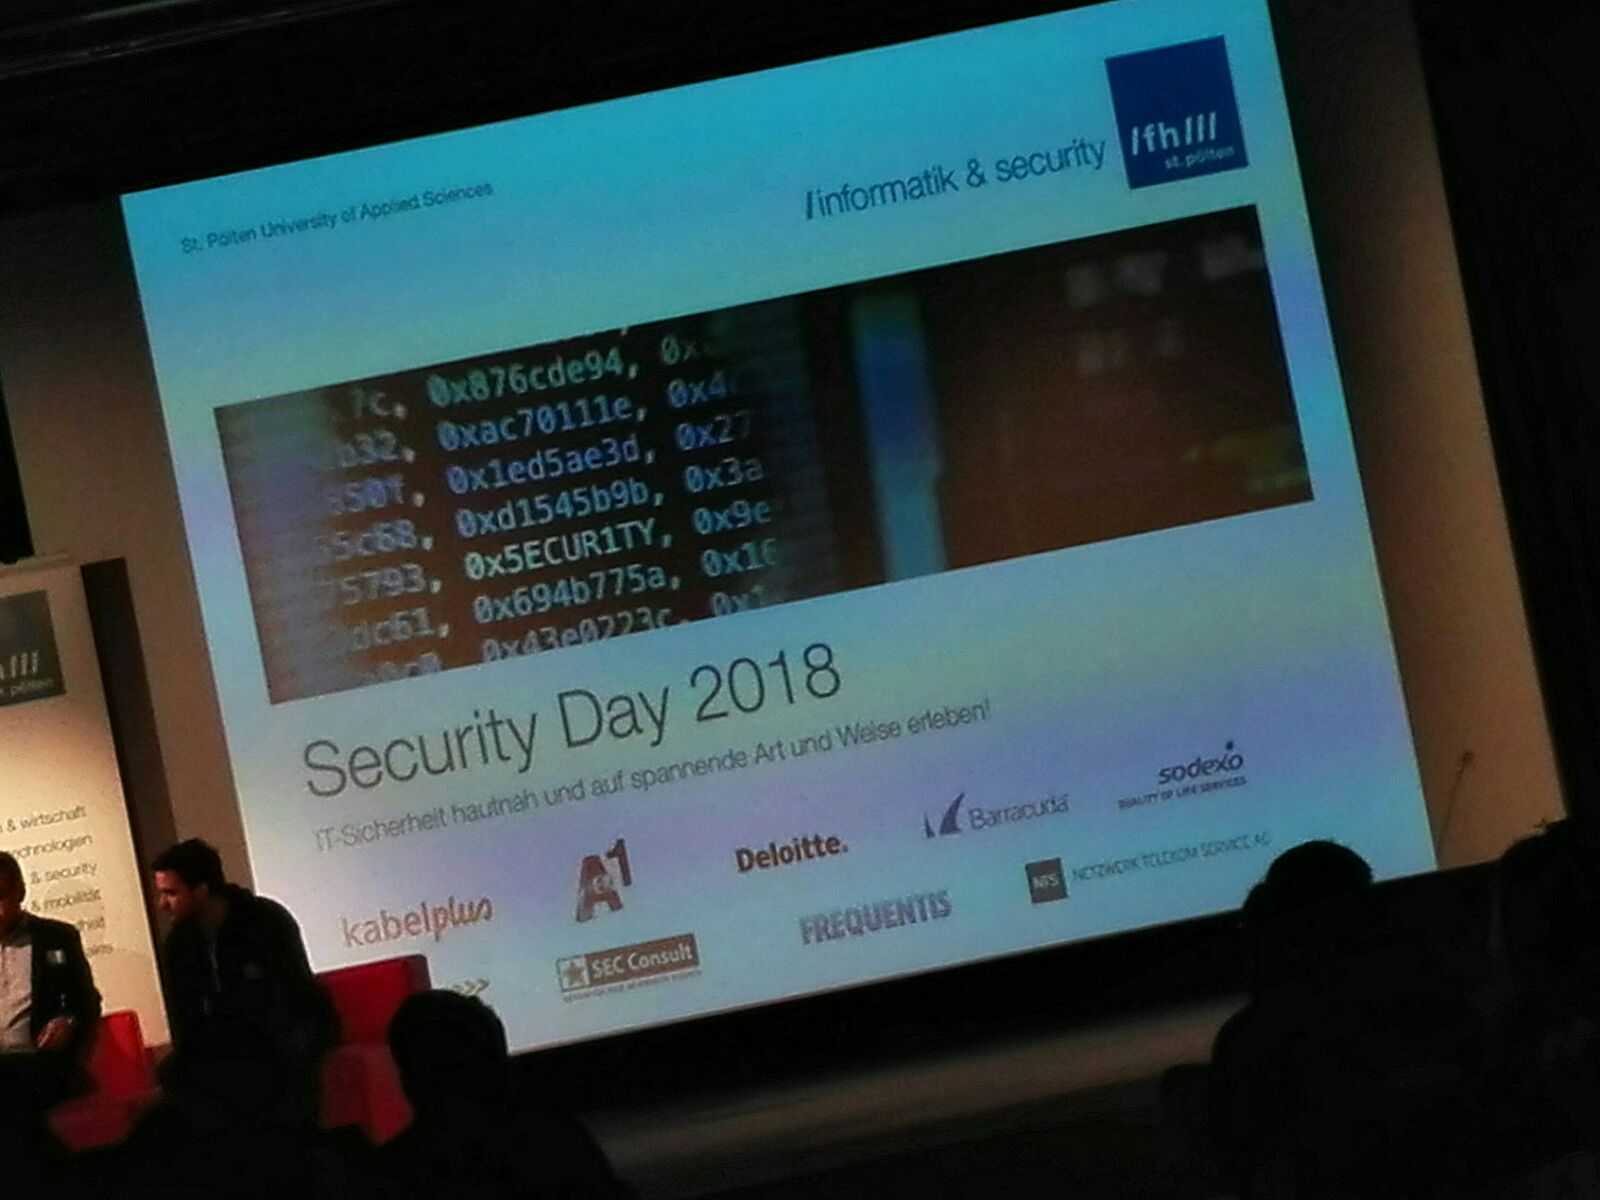 Security Day